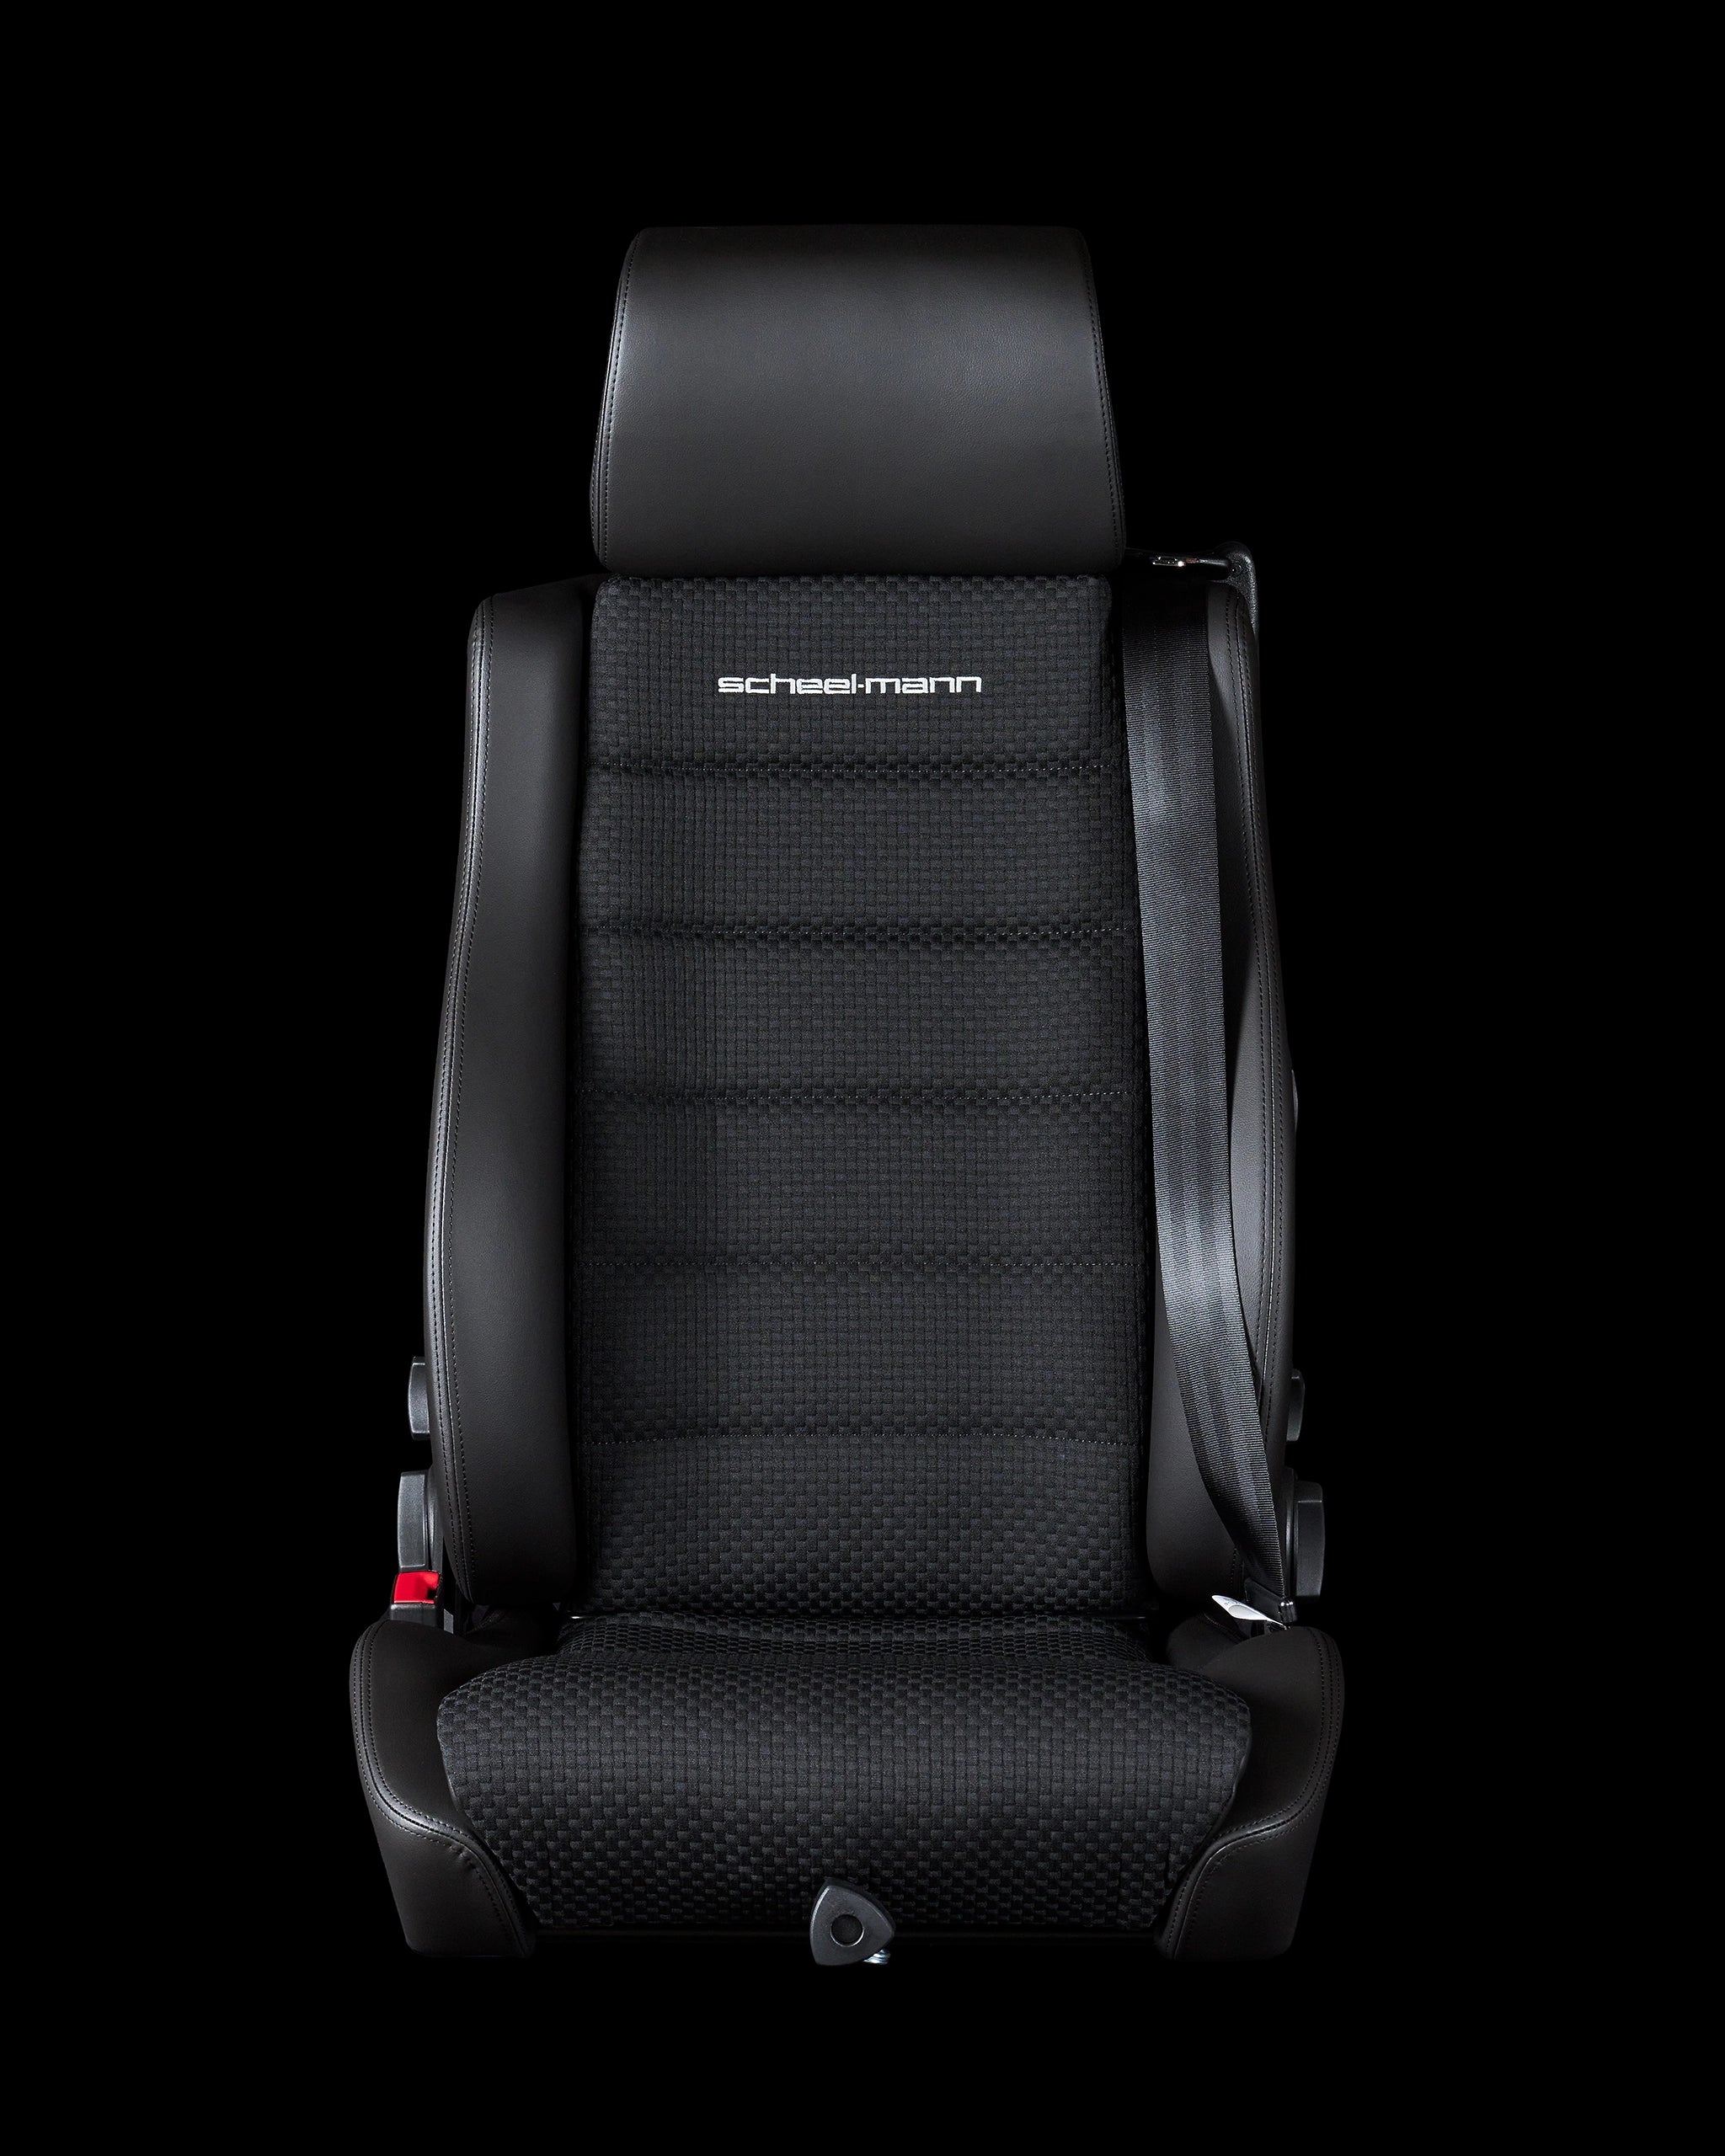 Vario F with Integrated Seatbelt